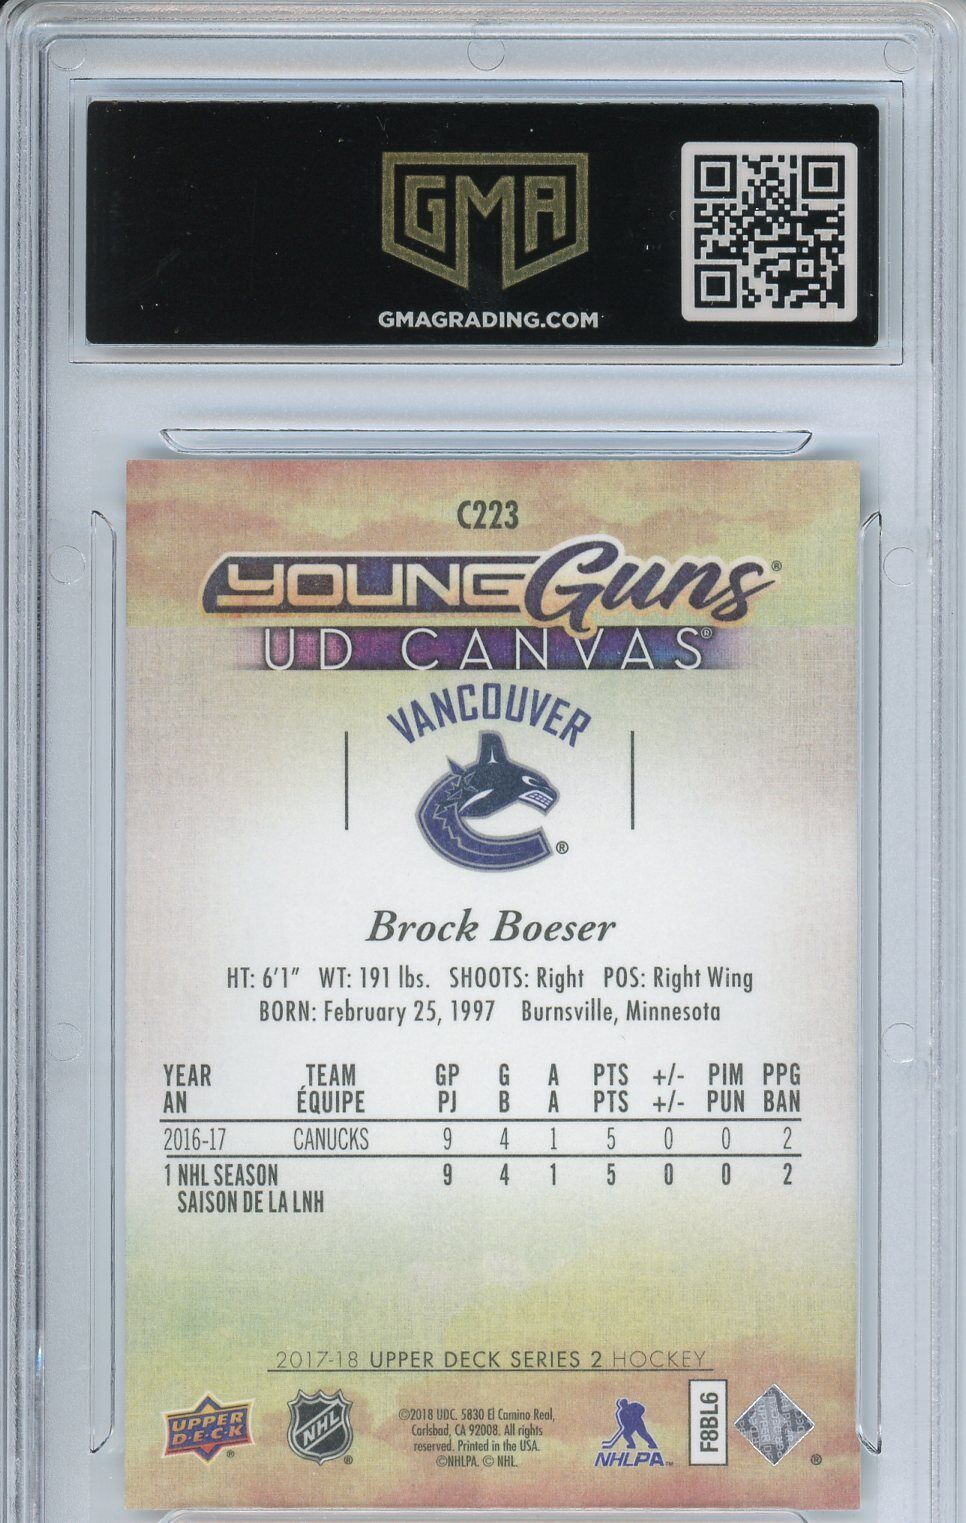 2017 Upper Deck Brock Boeser #C223 UD Canvas Young Guns Rookie GMA 8.5